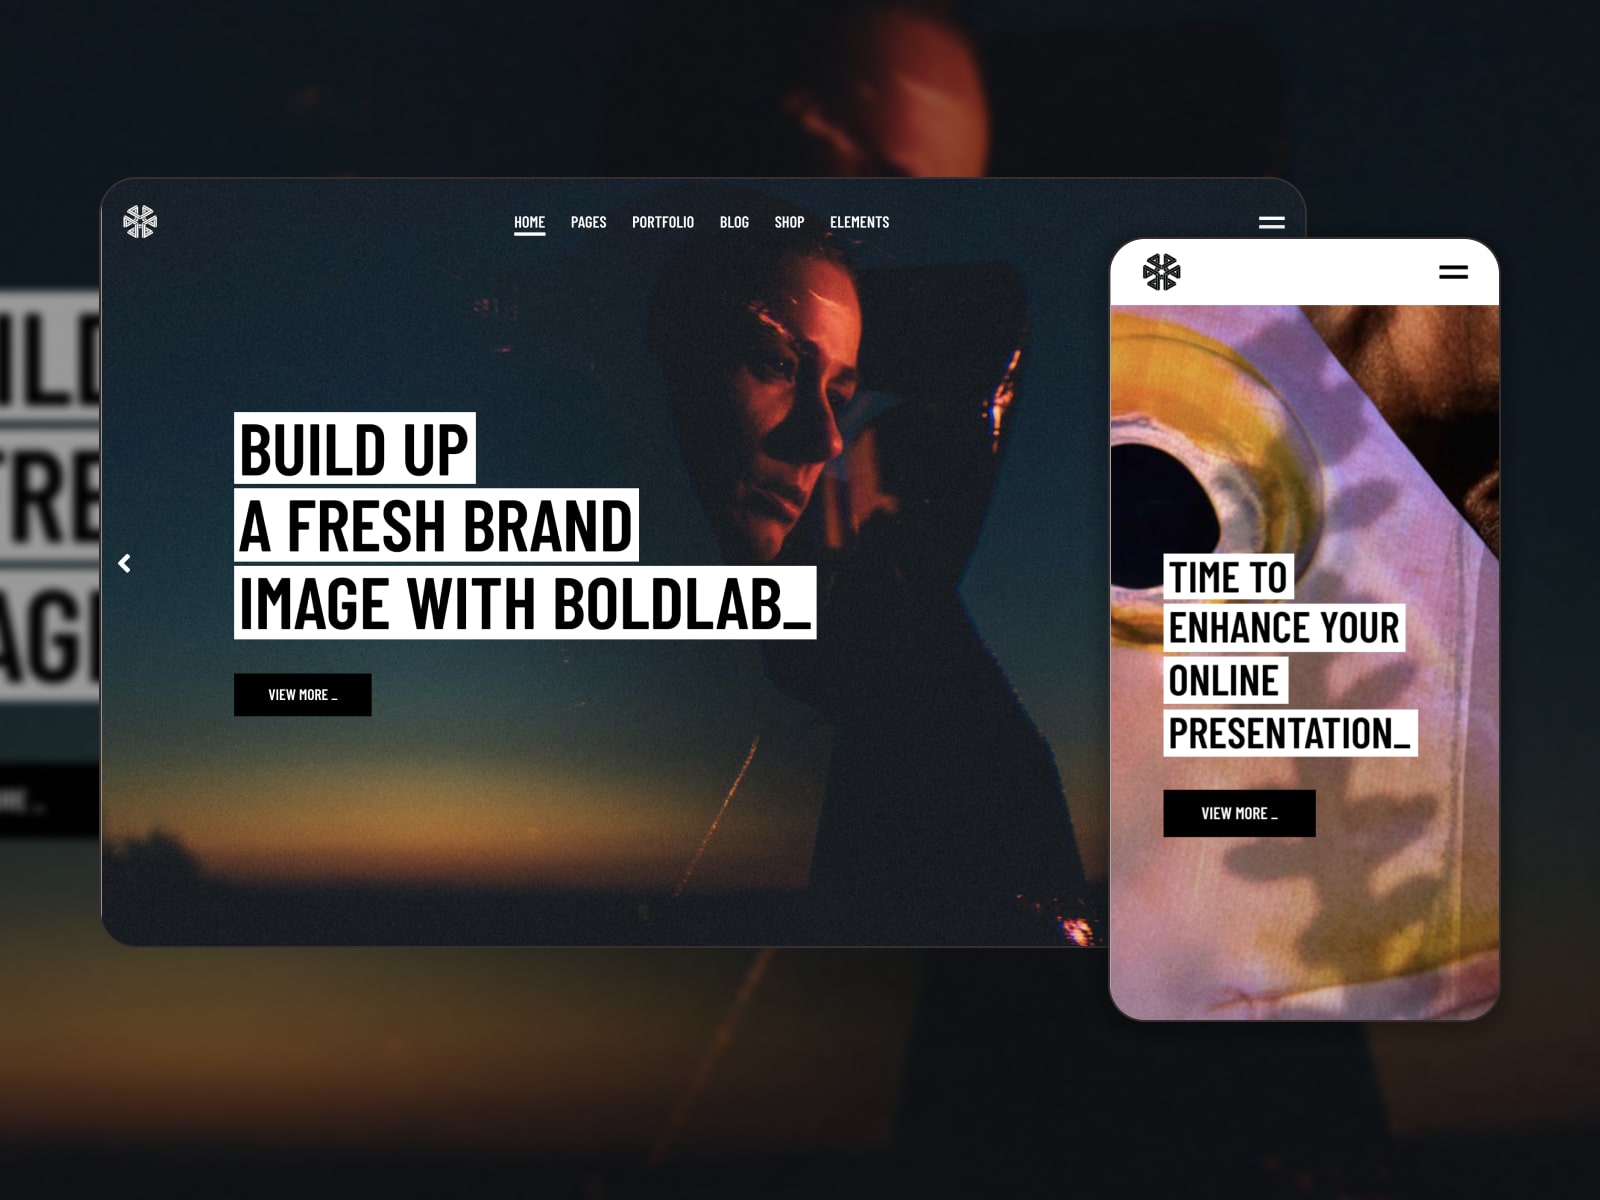 Collage of the Boldlab theme for WordPress creative digital agency websites.